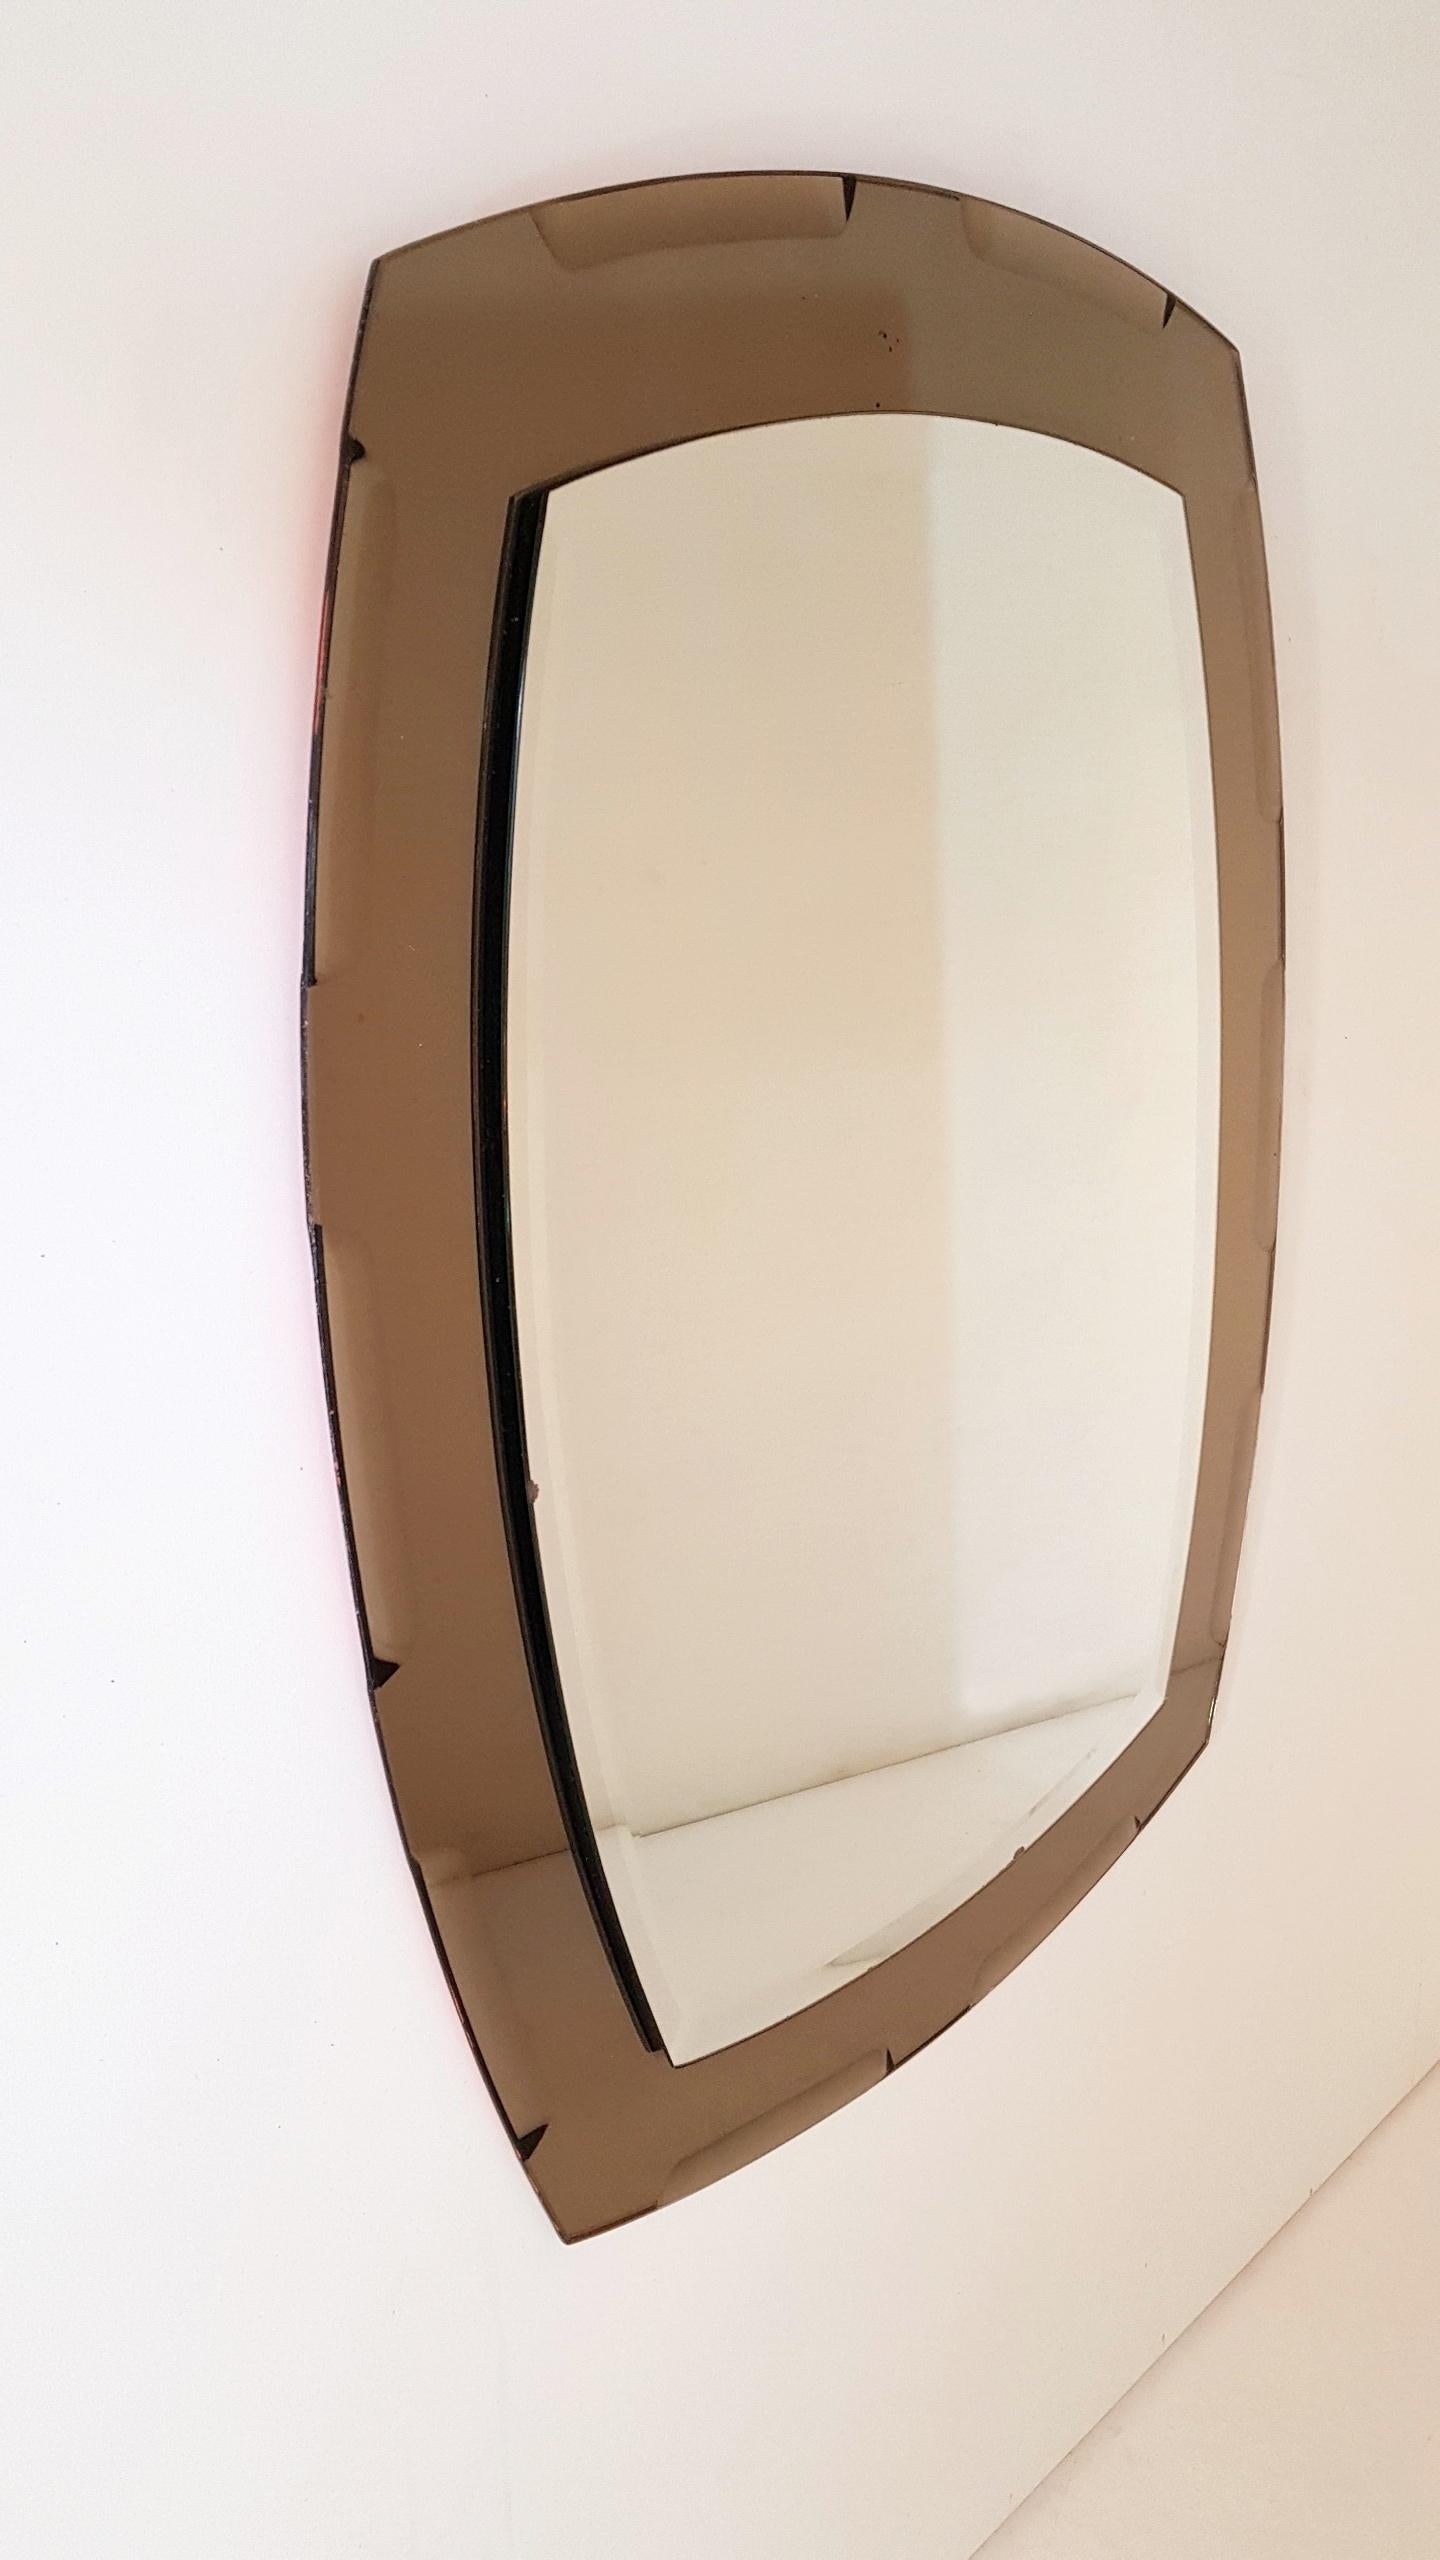 Vintage Italian, all glass mirror by crystal Lupi Luxor (Antonio Lupi). The main bevelled glass plate is mounted on to an oval smoked, silvery colored glass frame, which in some lights looks a silvery beige.

 